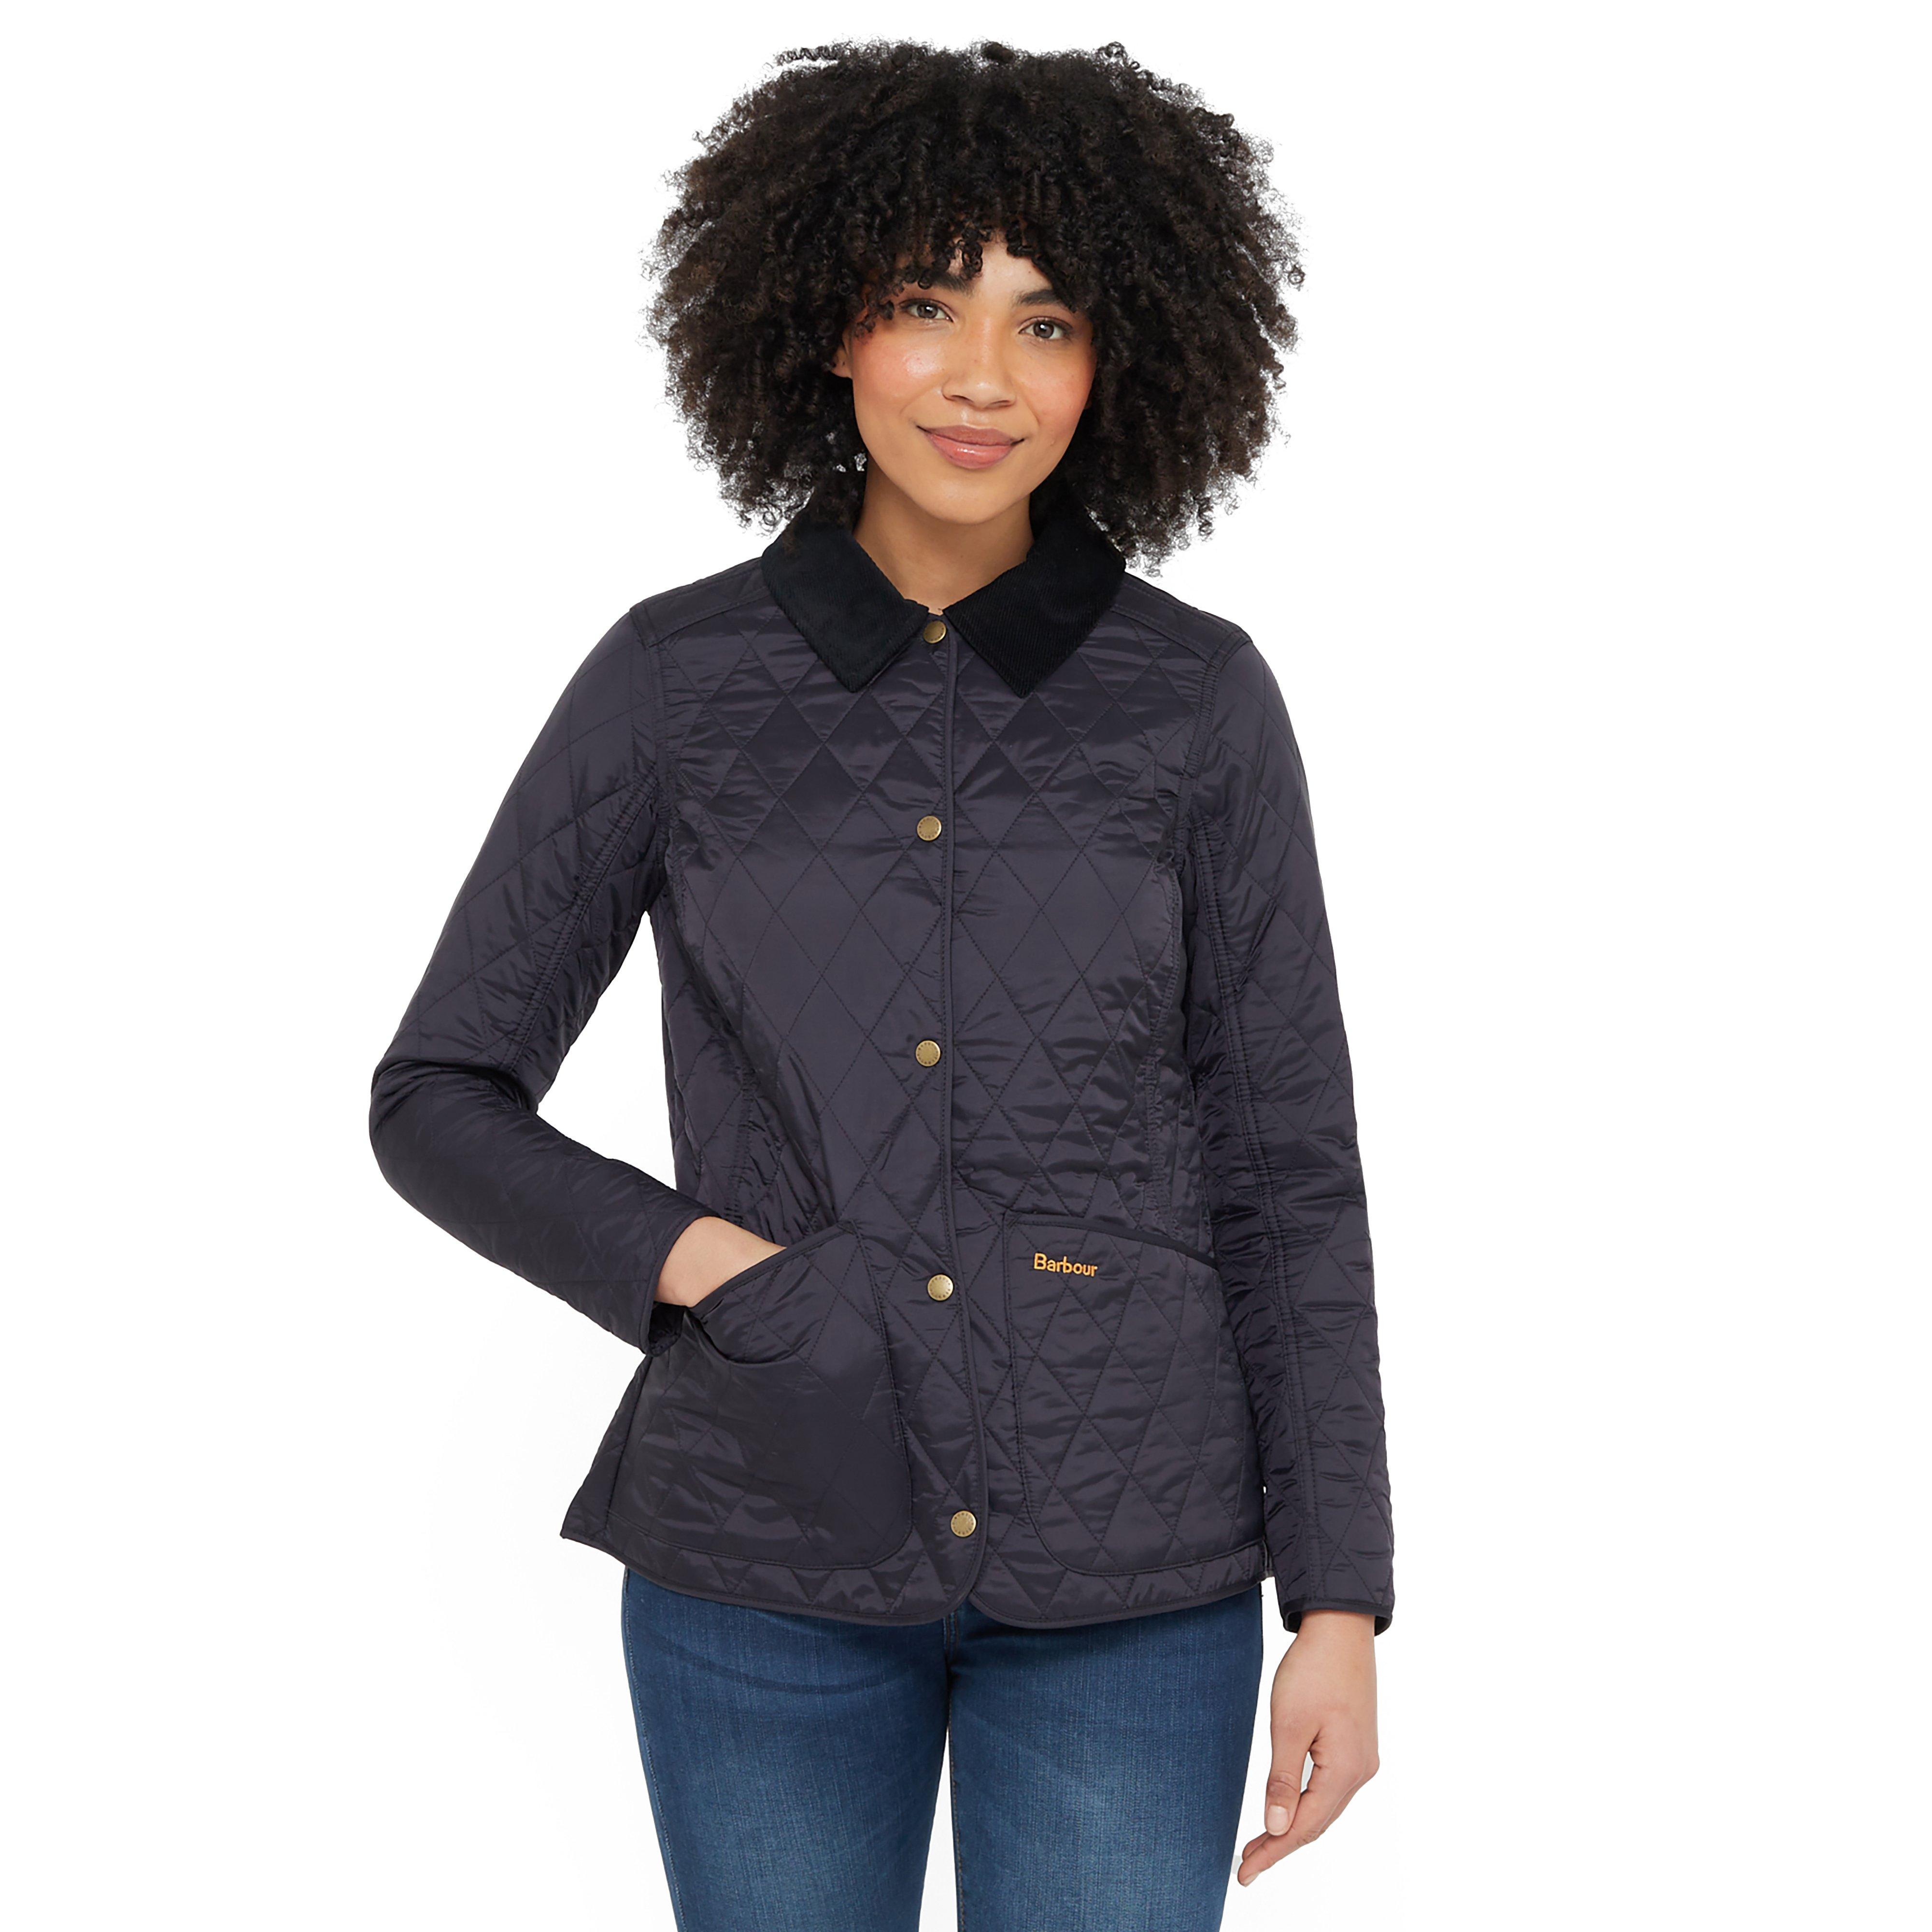 Womens Annandale Quilted Jacket Navy